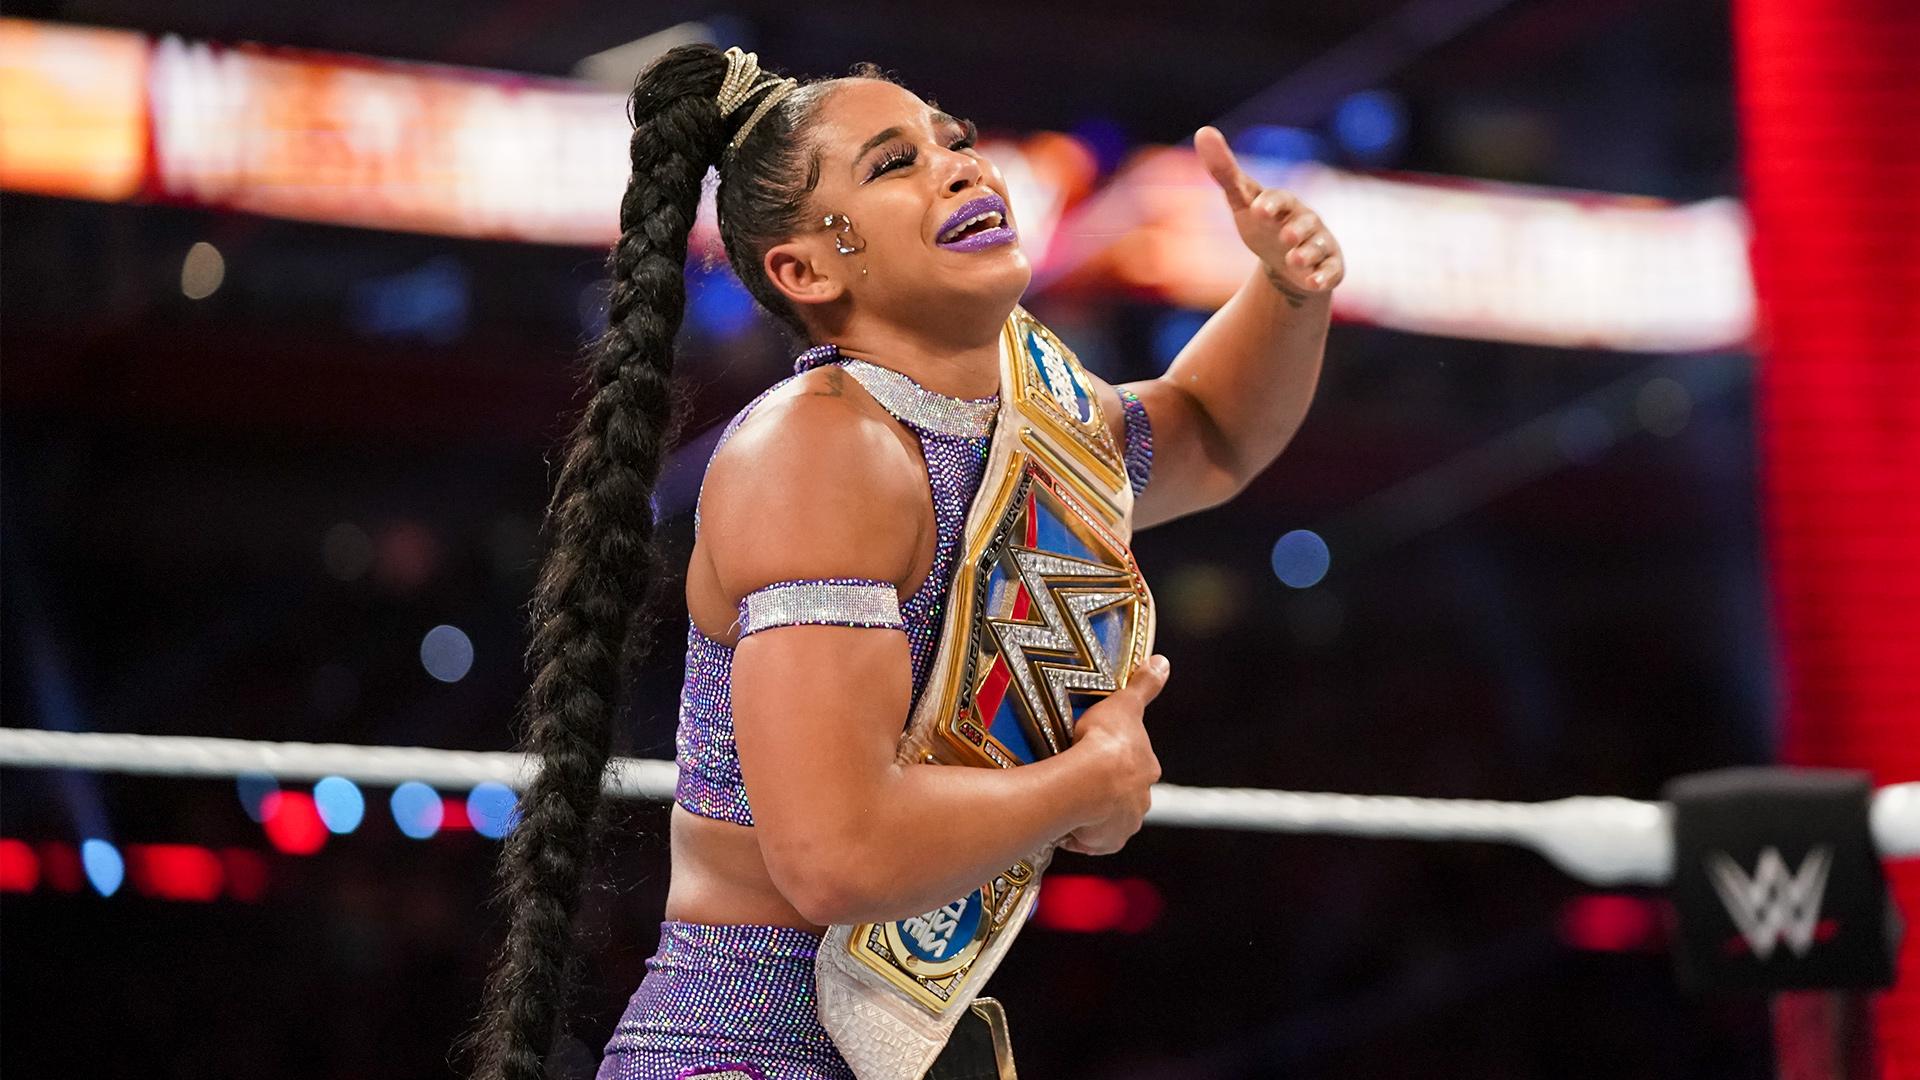 Bianca Belair overcome with emotion after winning the Smackdown's Women's Championship at Night One of WrestleMania 37 (WrestleMania 37. 1972-Present. World Wrestling Entertainment.).